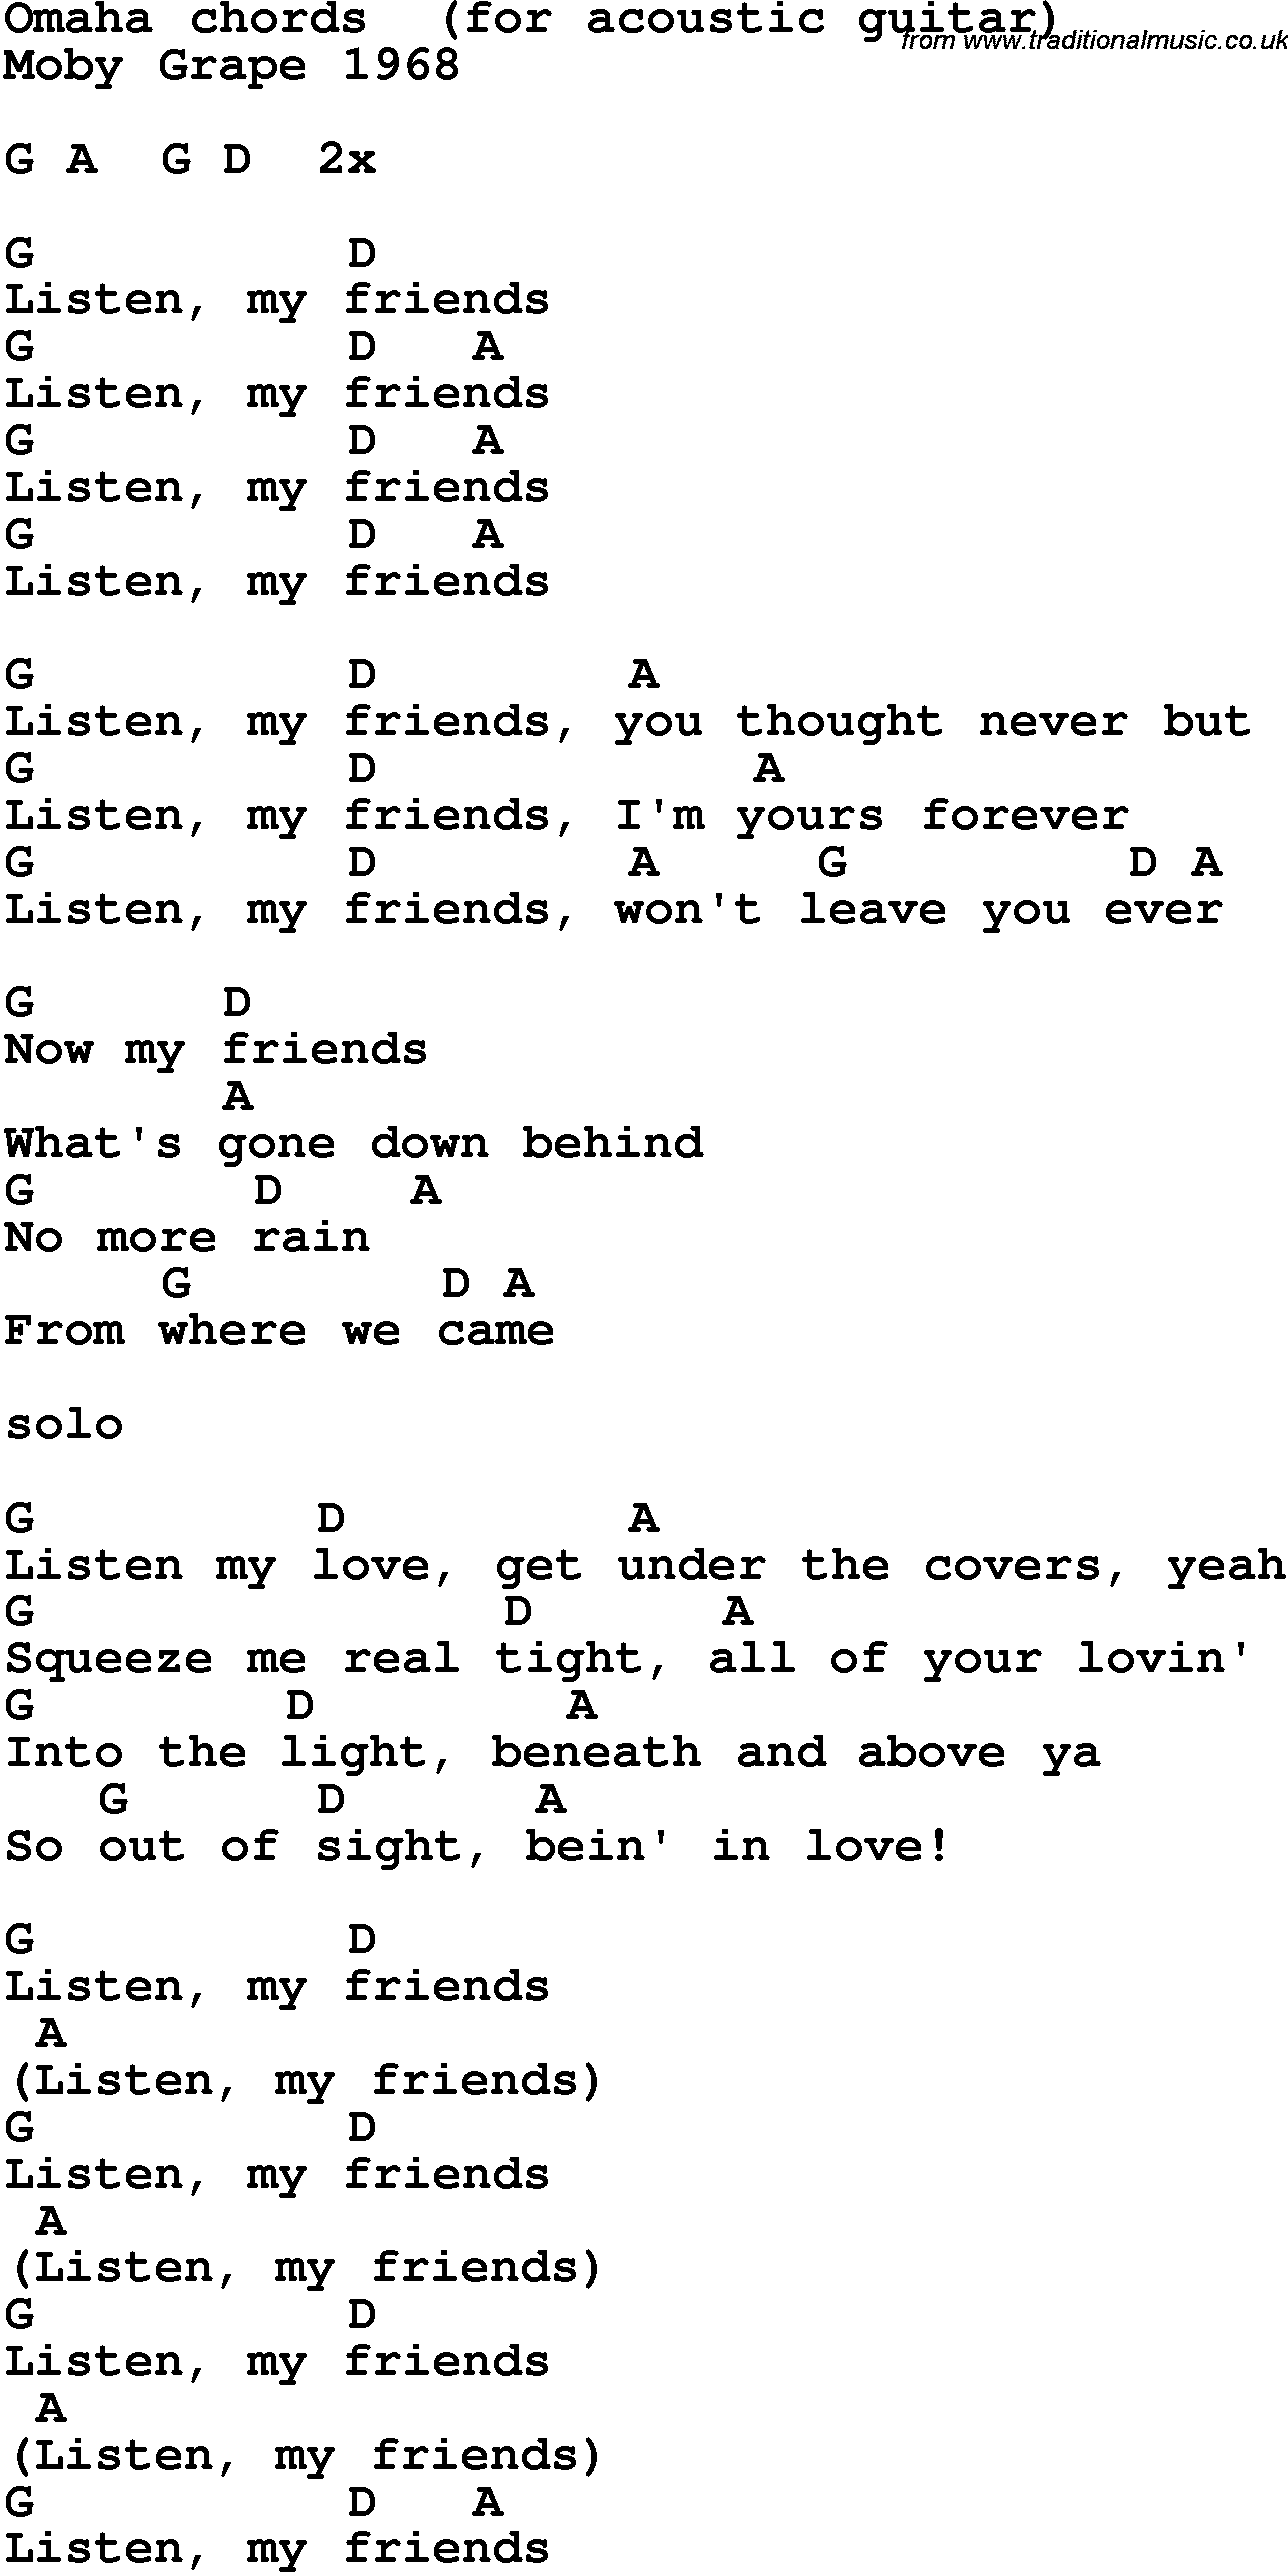 Song Lyrics with guitar chords for Omaha